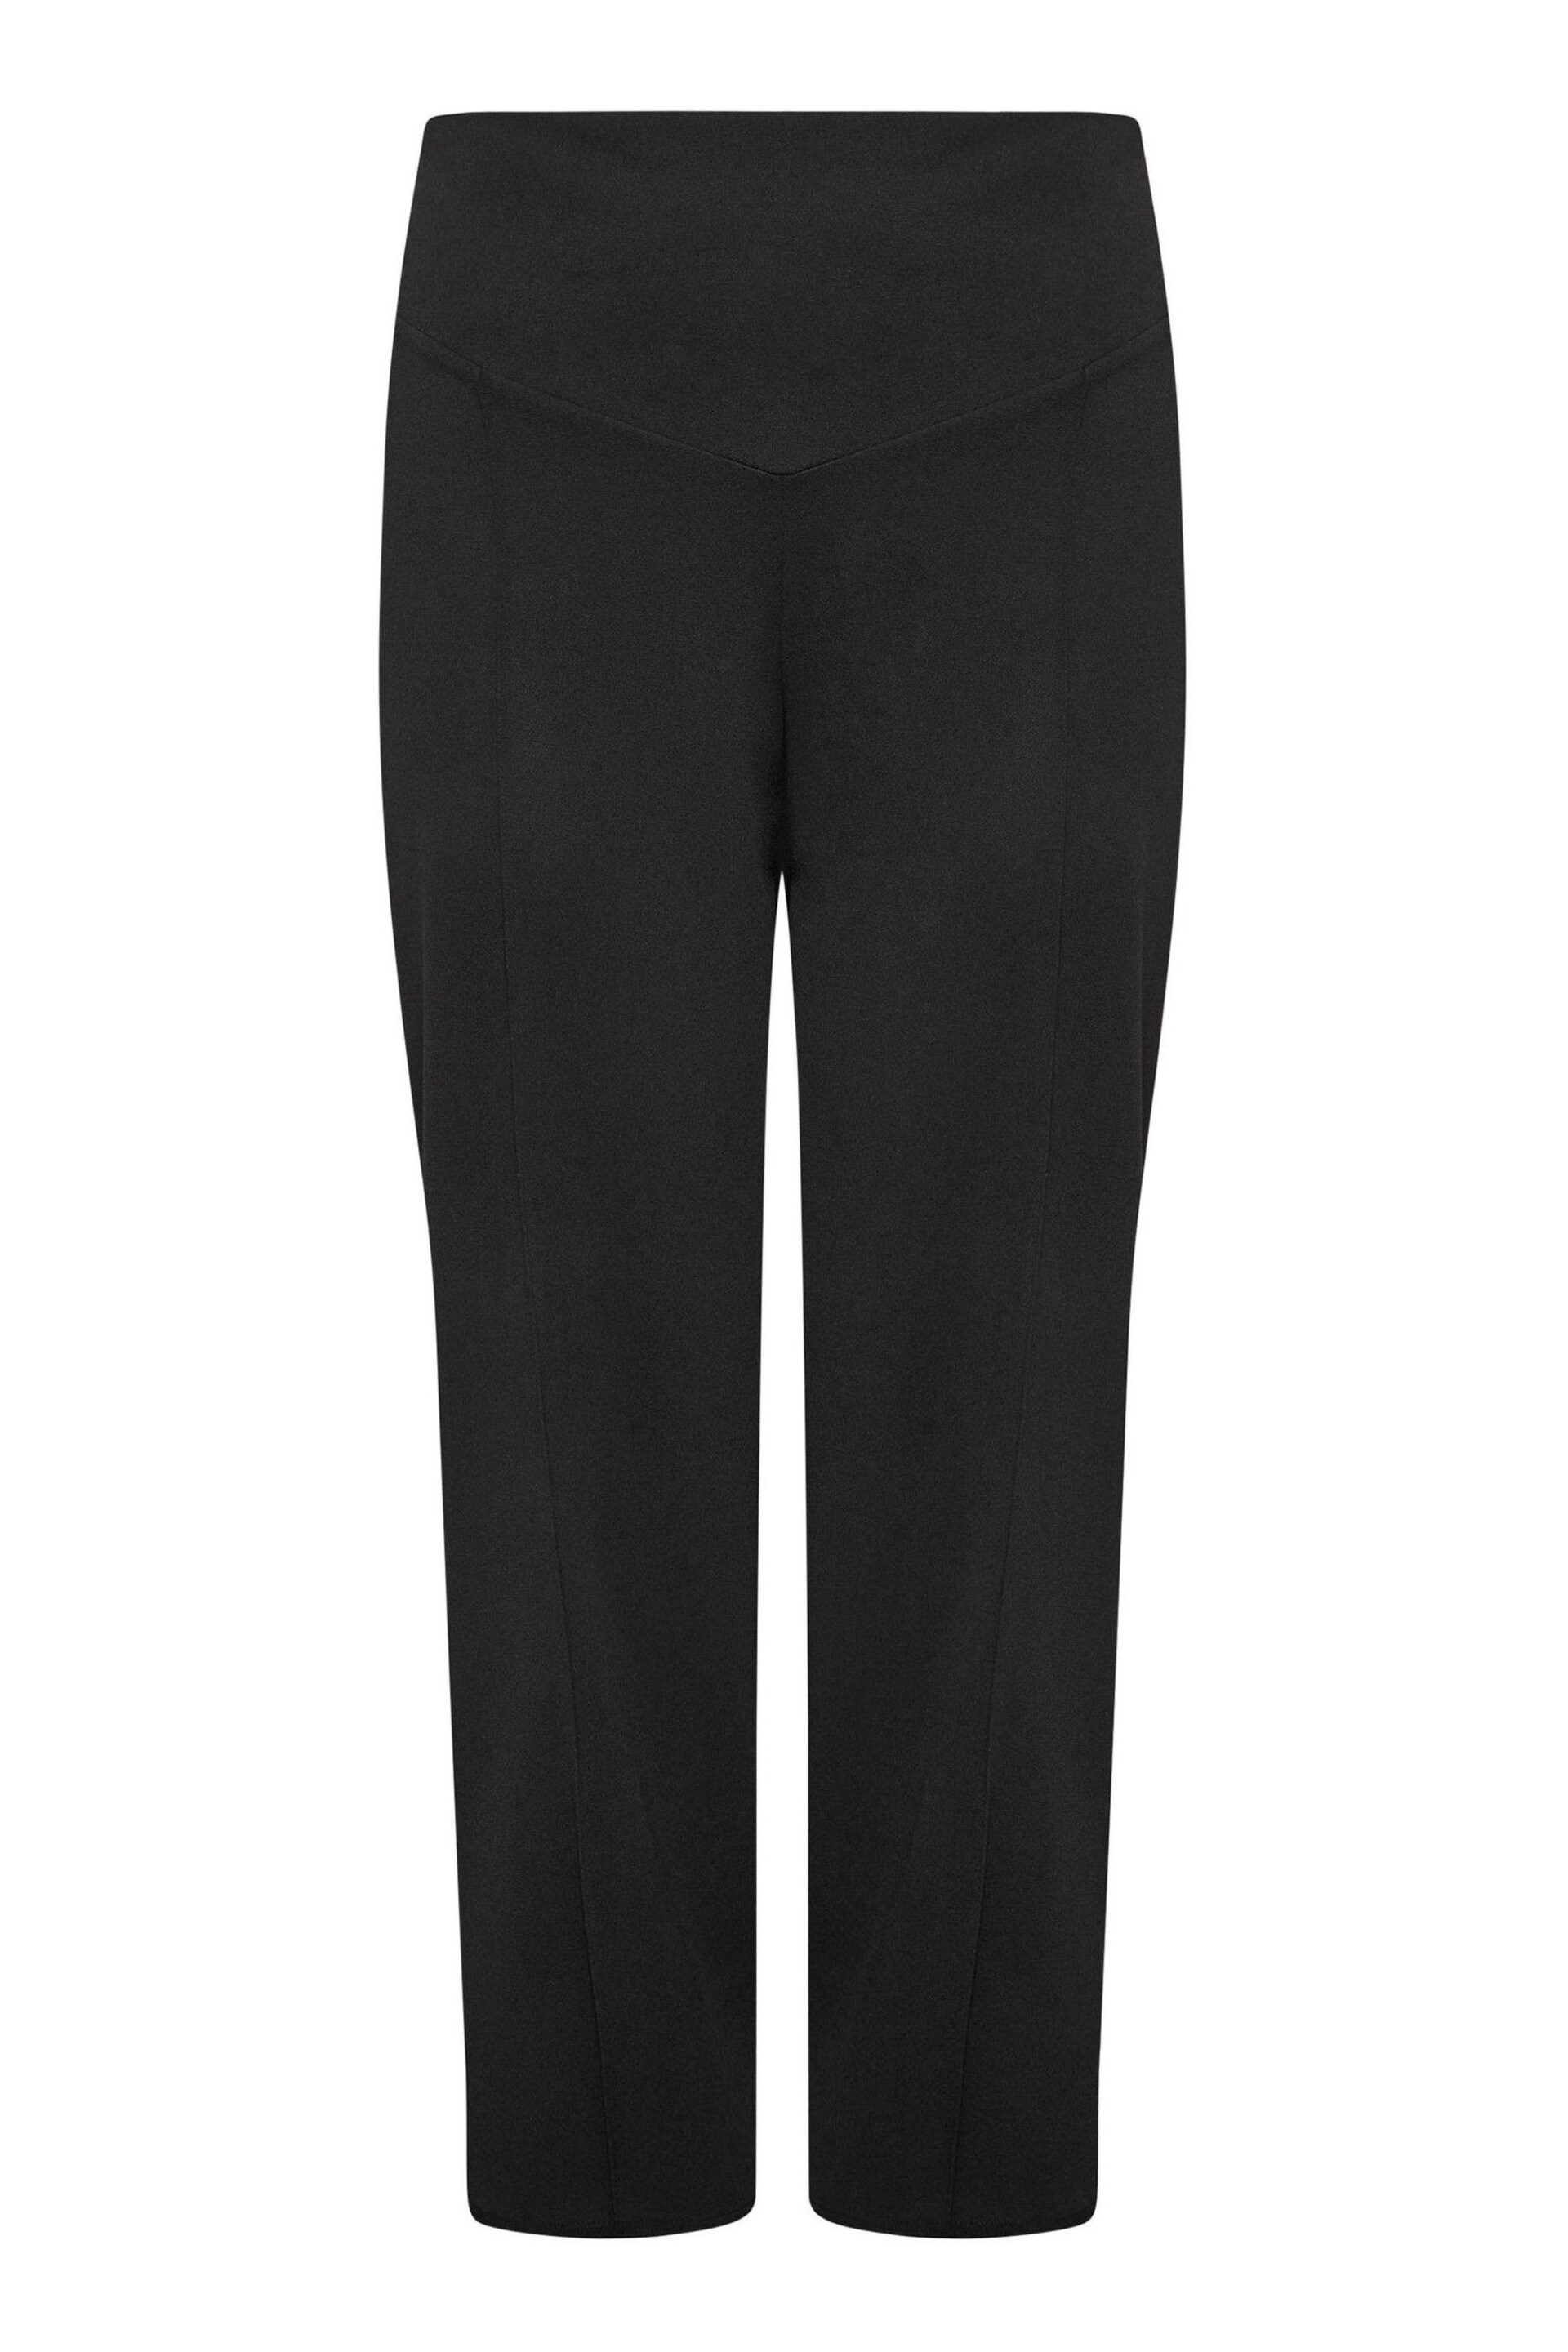 Yours Curve Black Panelled Trousers - Image 5 of 5